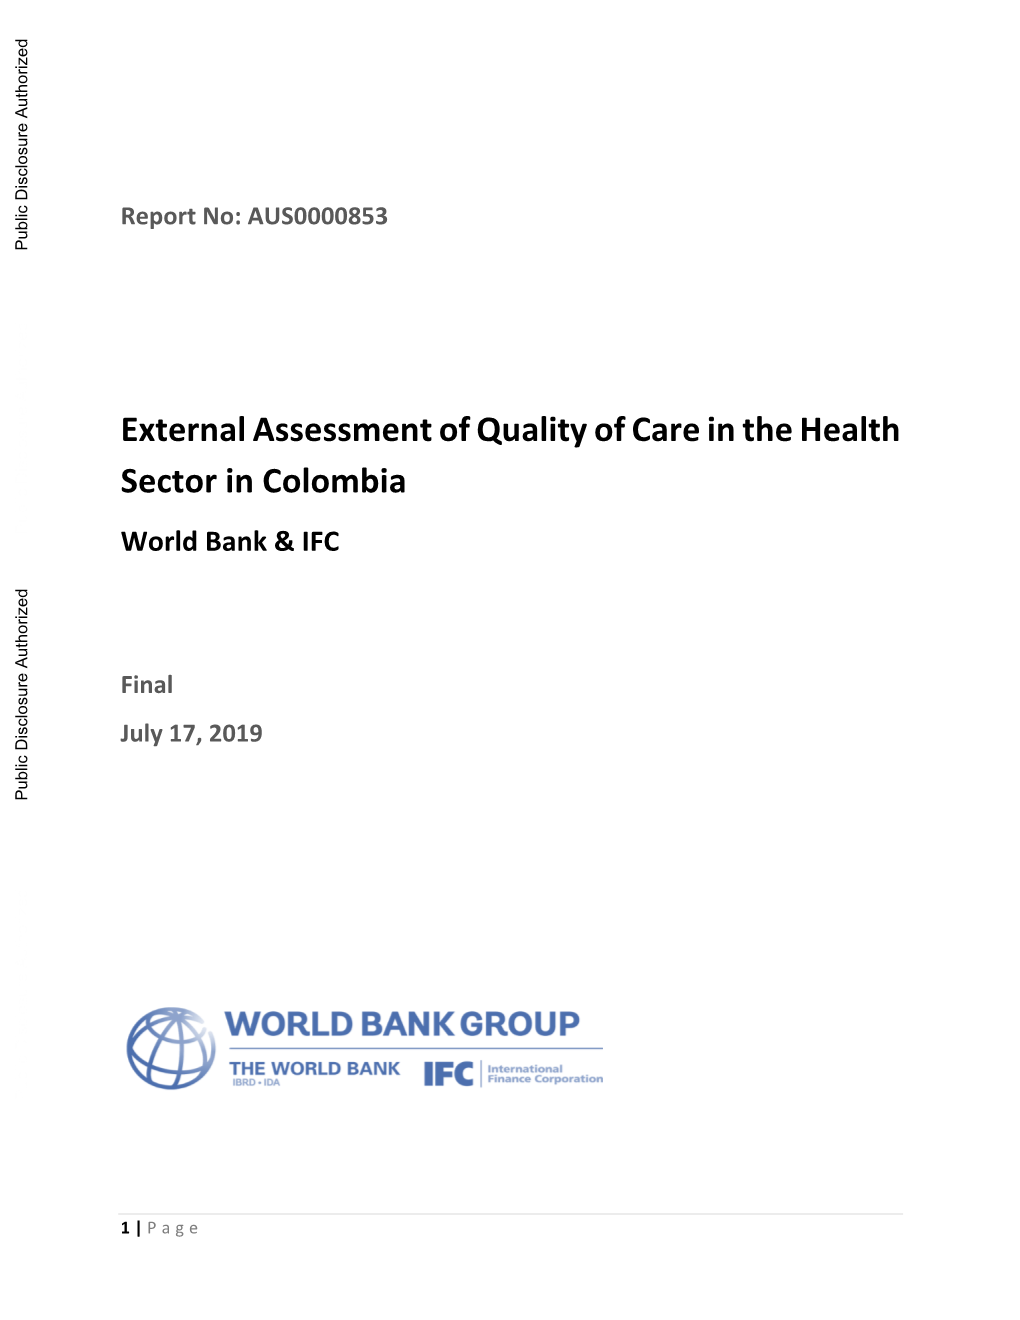 Assessment of the Quality of Health Care in Colombia